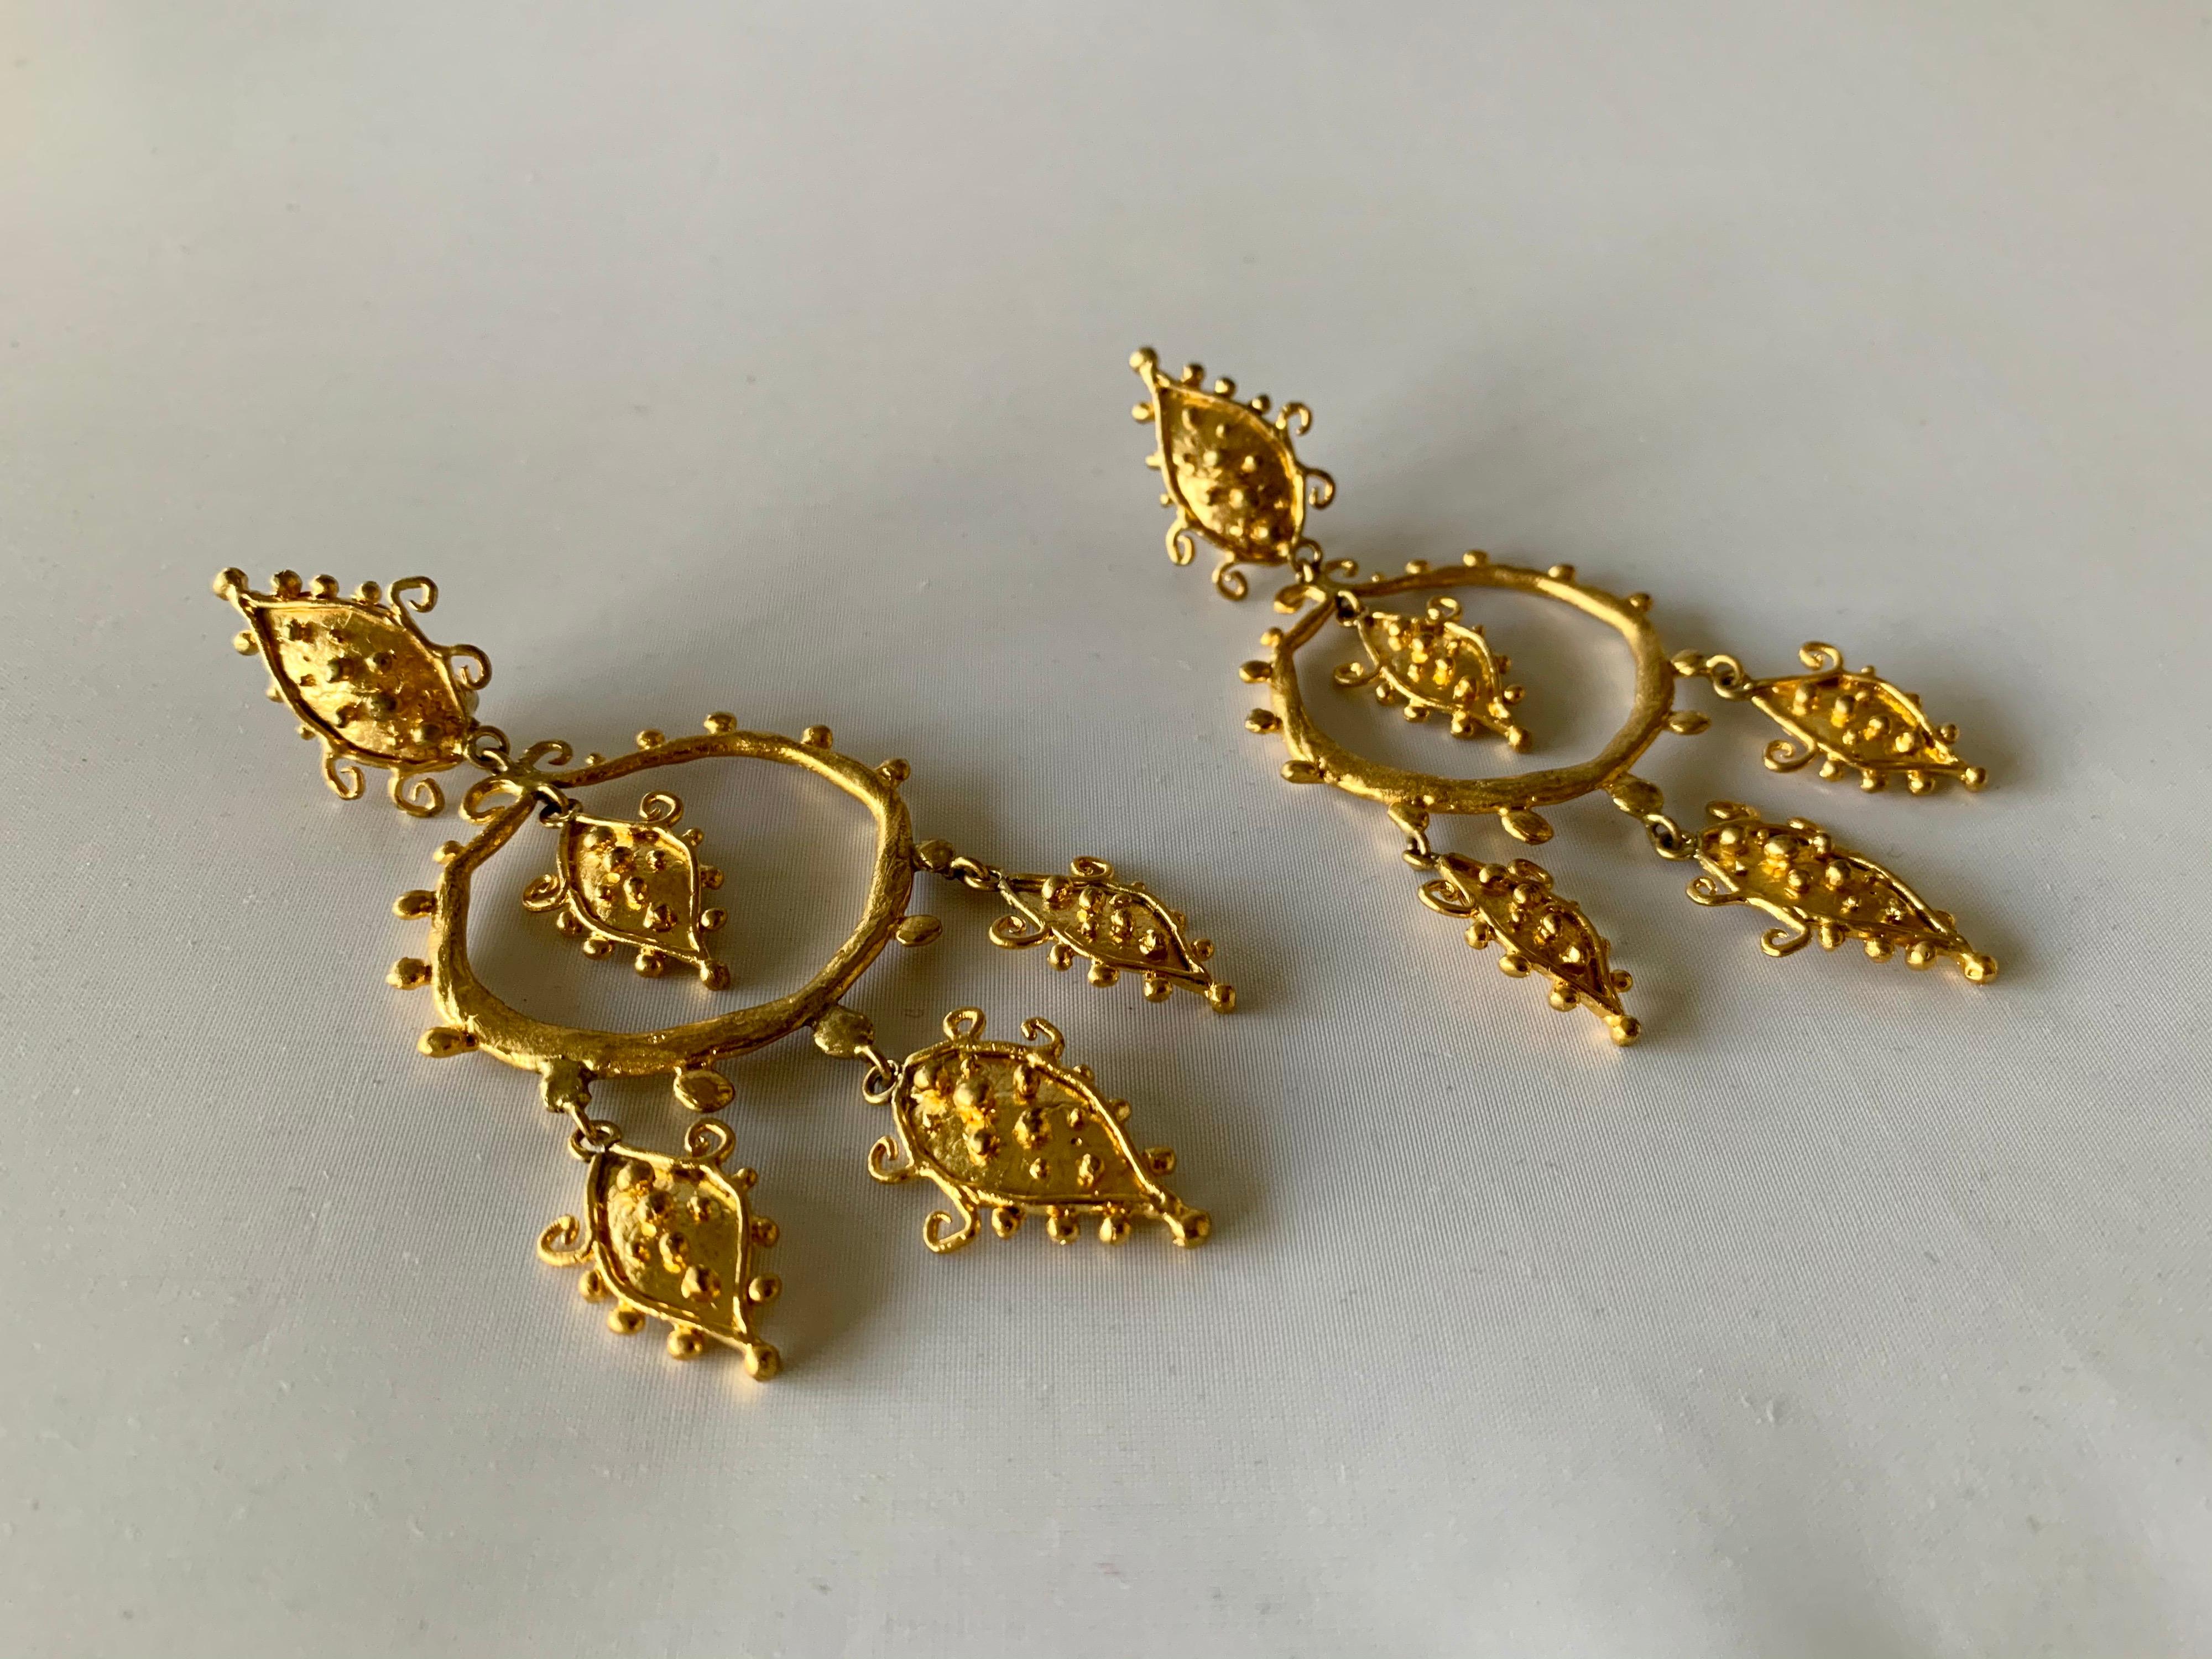 Stunning vintage fashion-forward Parisian statement earrings!  The whimsical clip-on statement earrings are comprised out of lightweight hammered gold-plated brass segments in a unique motif with dangling leaf-like accents. 

Herve Van Der